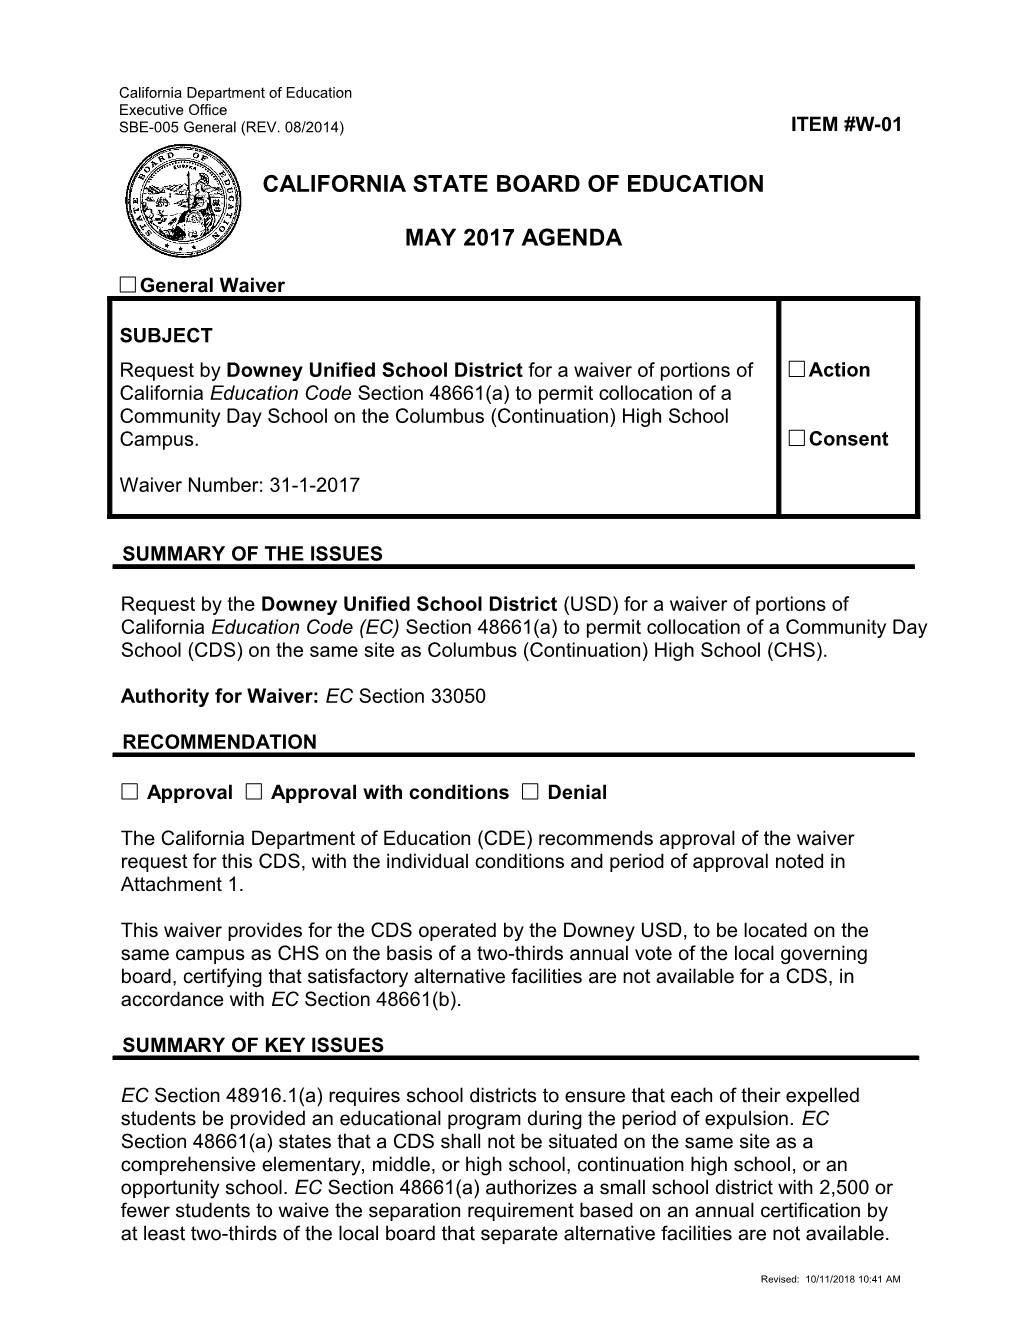 May 2017 Agenda Item W-01 - Meeting Agendas (CA State Board of Education)